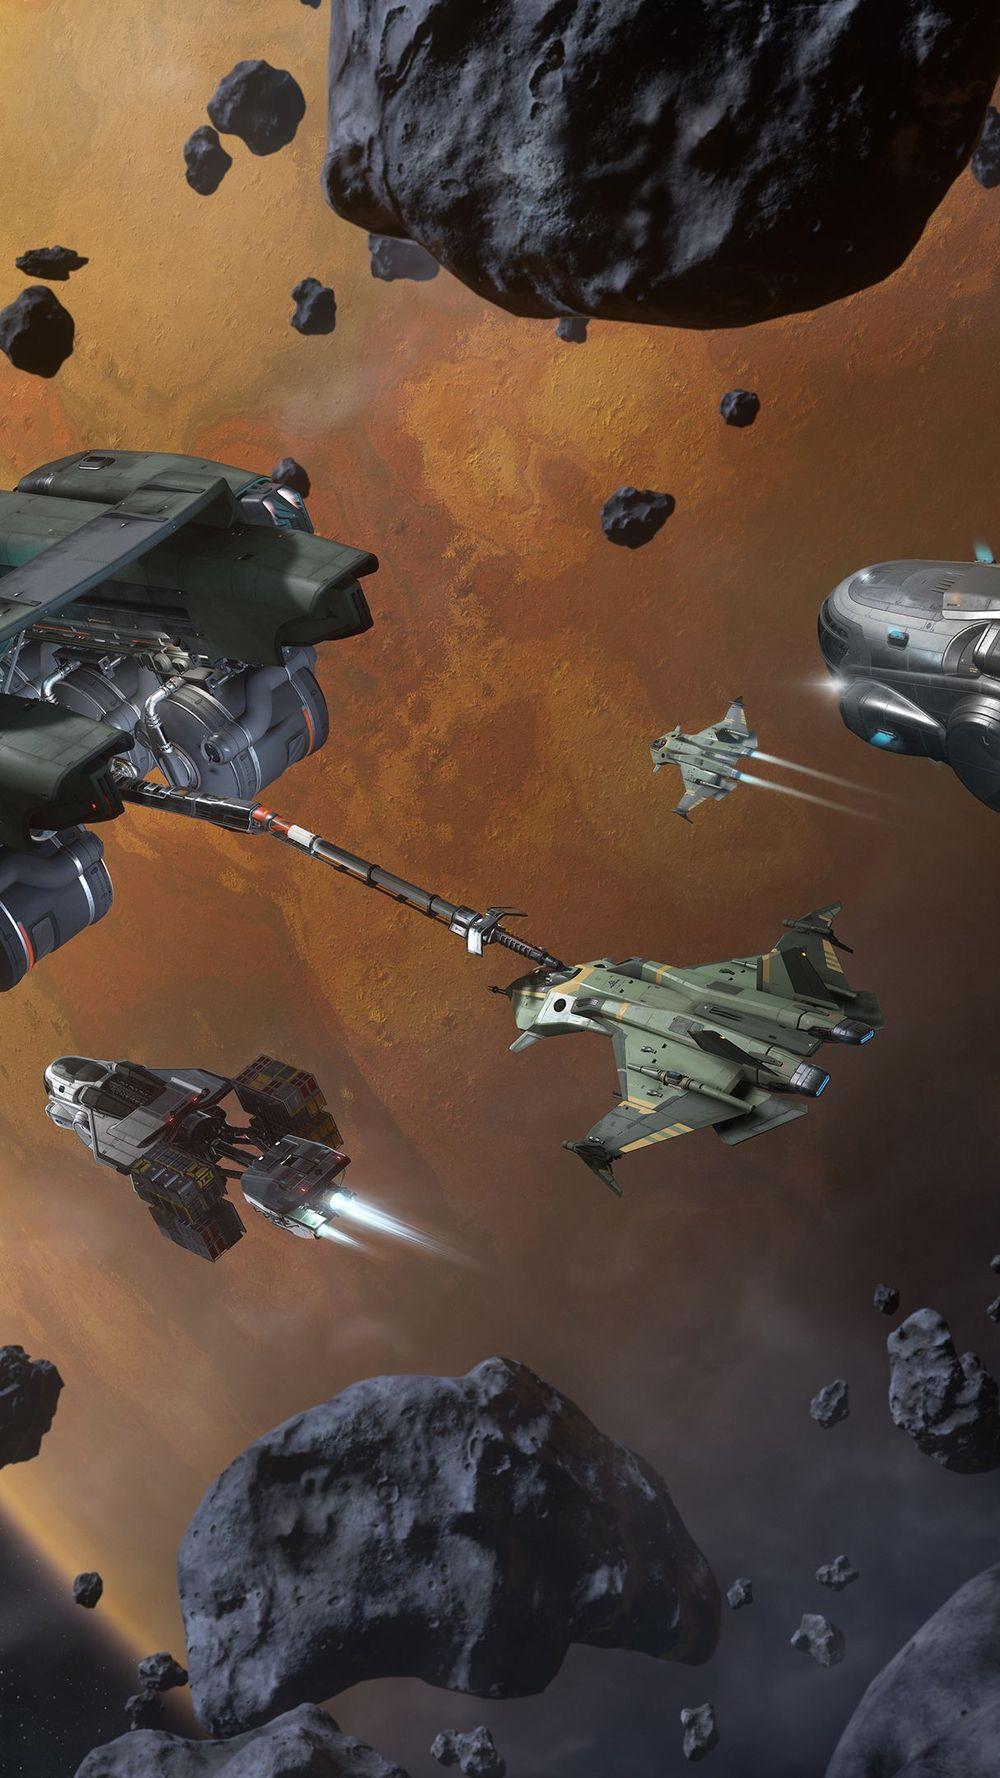 Siege of Orison - Roberts Space Industries  Follow the development of Star  Citizen and Squadron 42